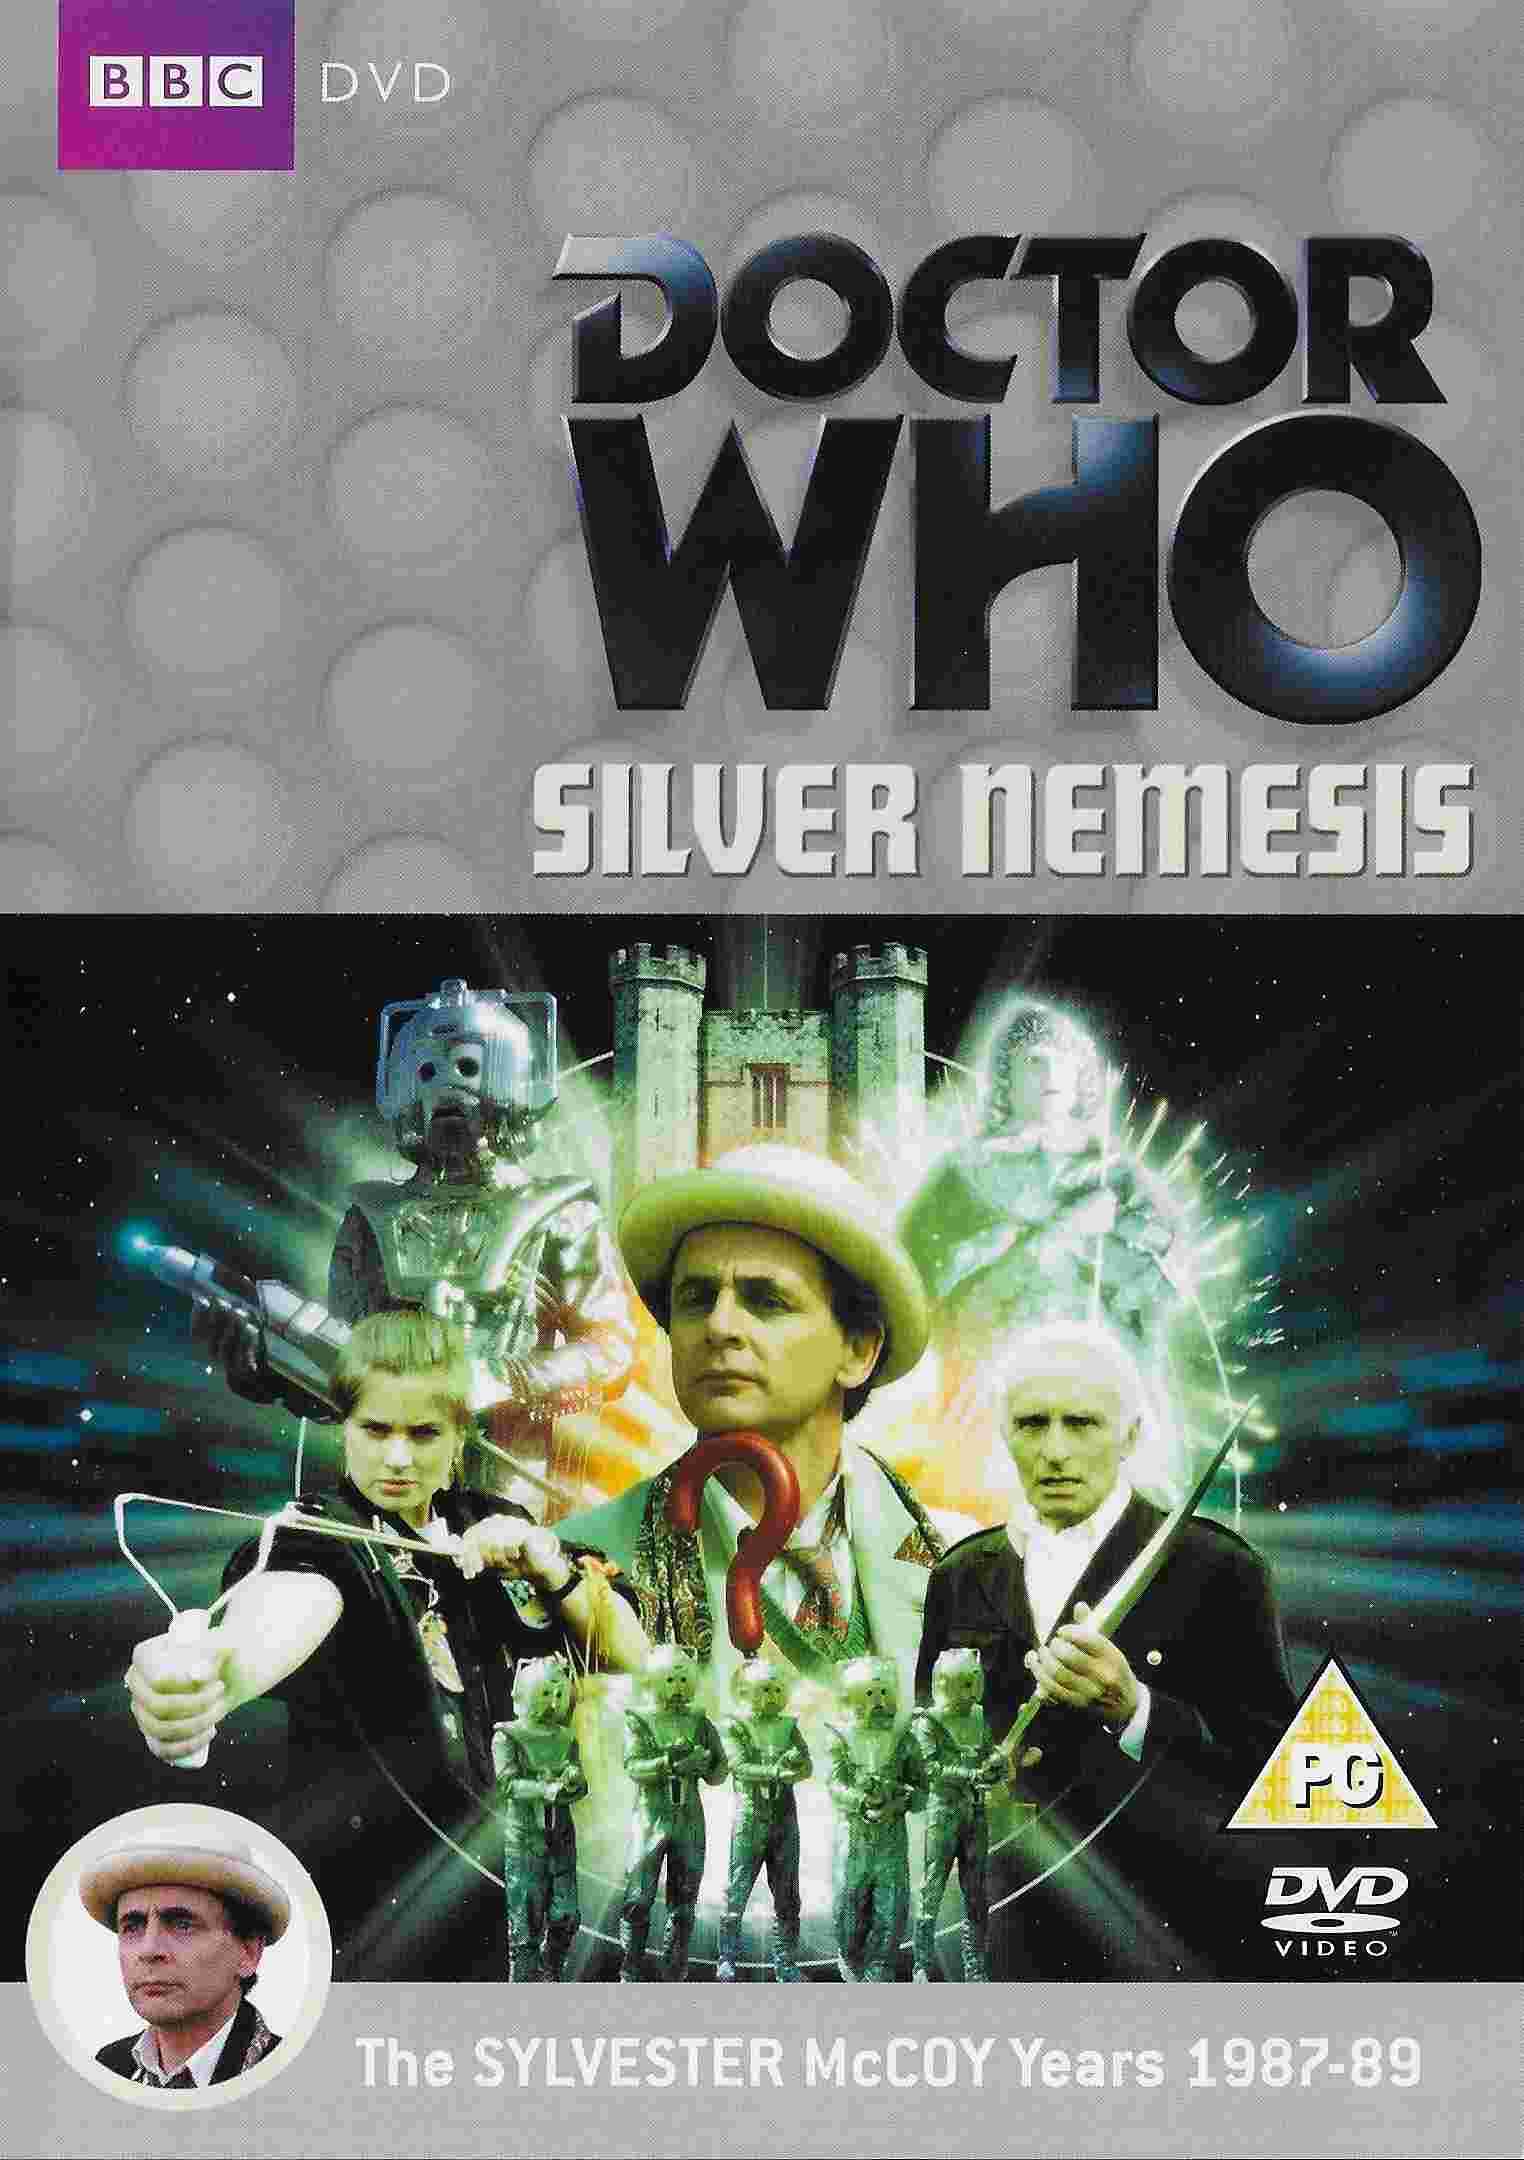 Picture of BBCDVD 2854B Doctor Who - Silver nemesis by artist Kevin Clarke from the BBC dvds - Records and Tapes library